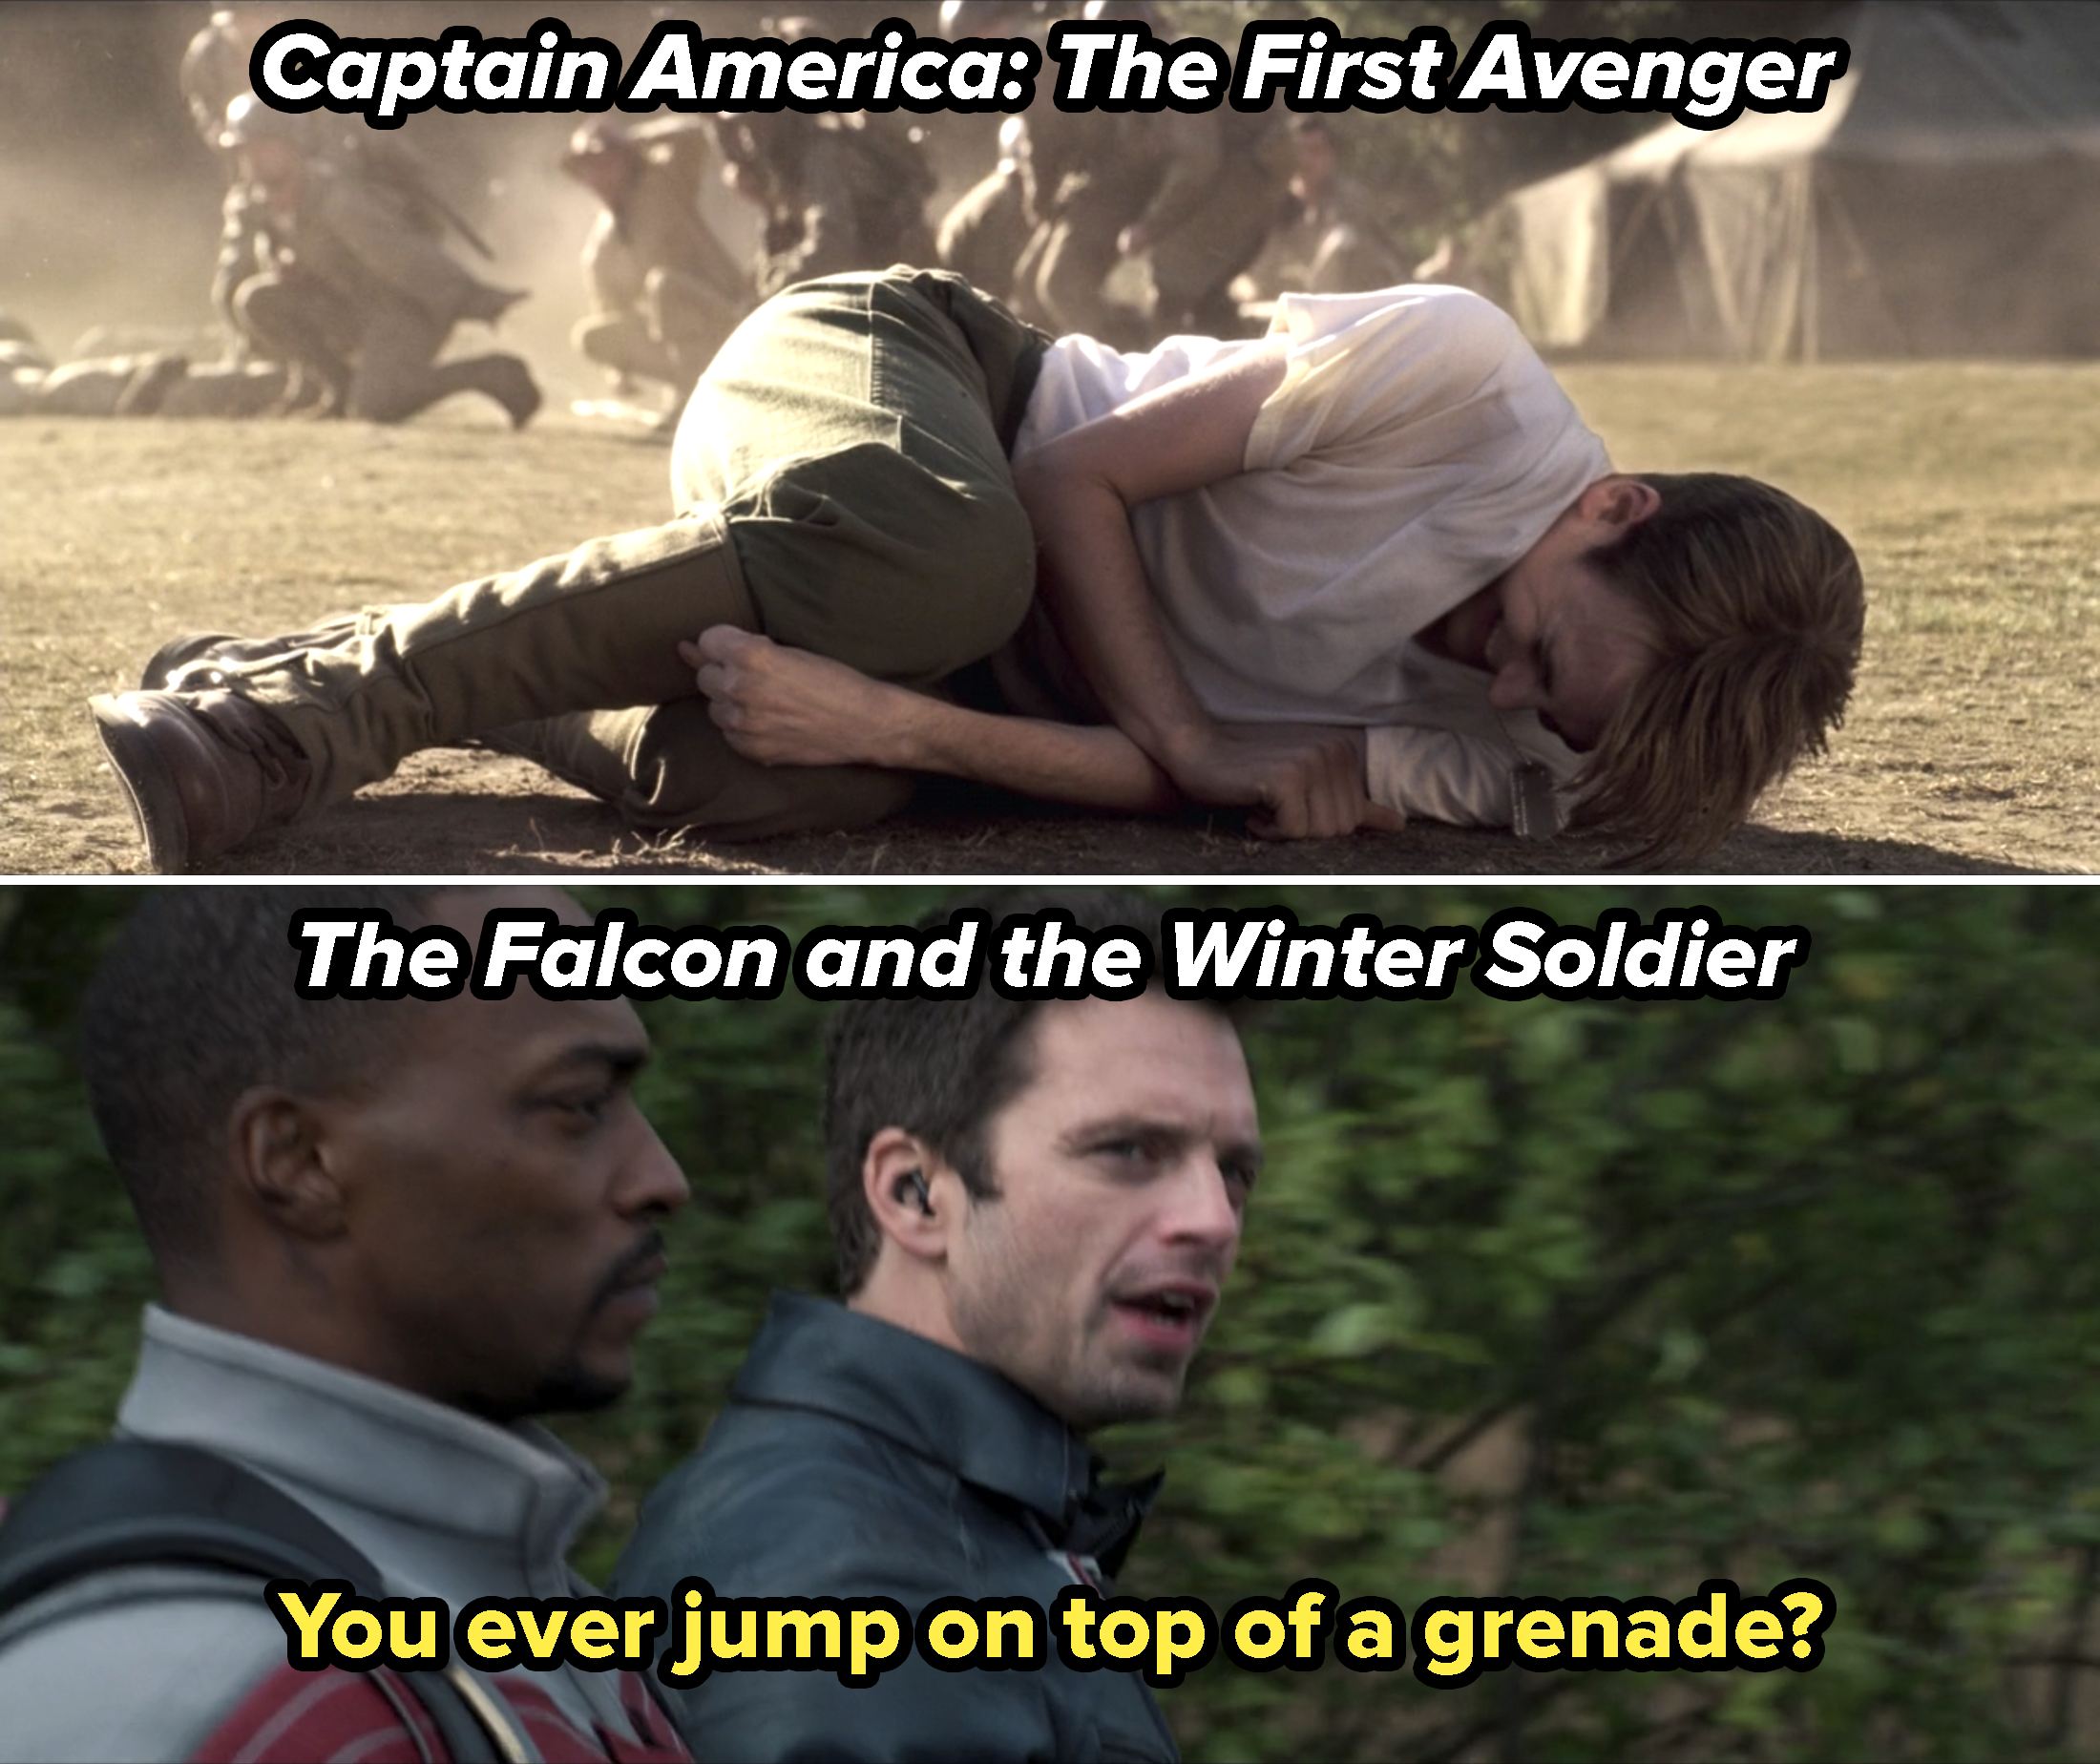 Steve curled up on the ground over a grenade, and Bucky asking, &quot;You ever jump on top of a grenade&quot;